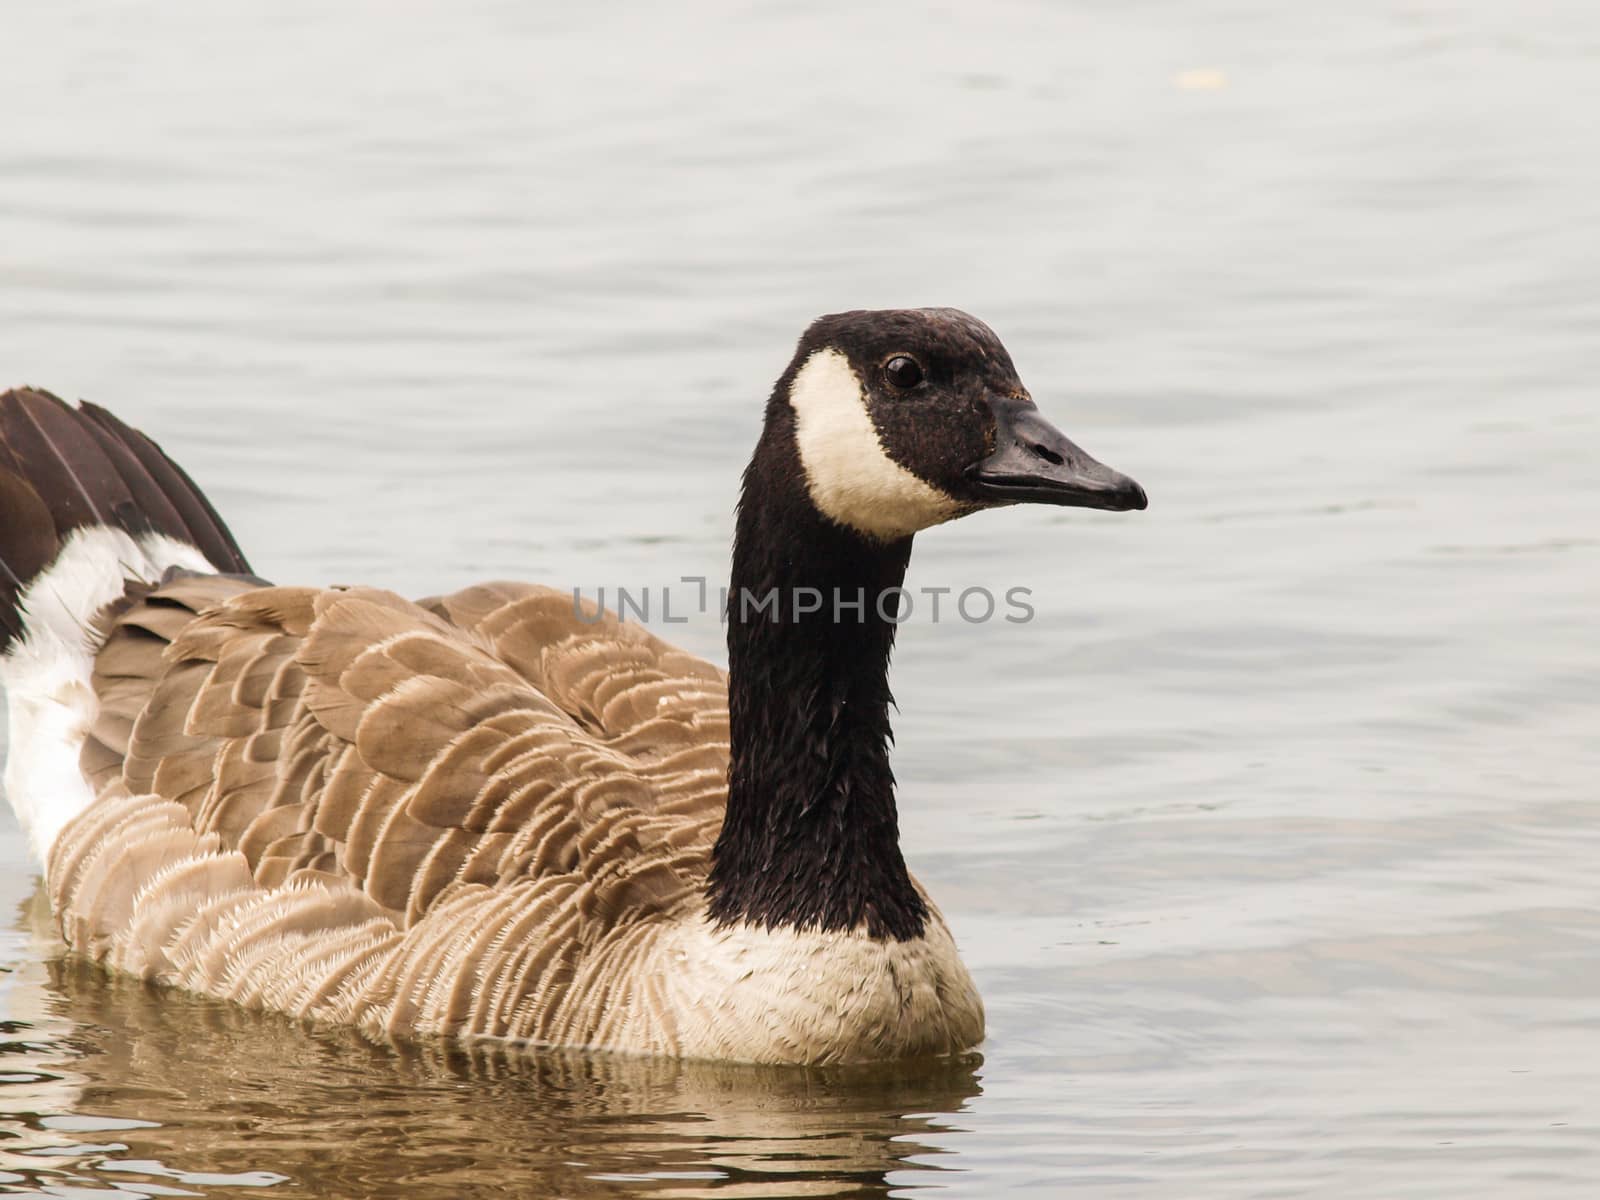 One Barnacle goose in shimmering water at daytime